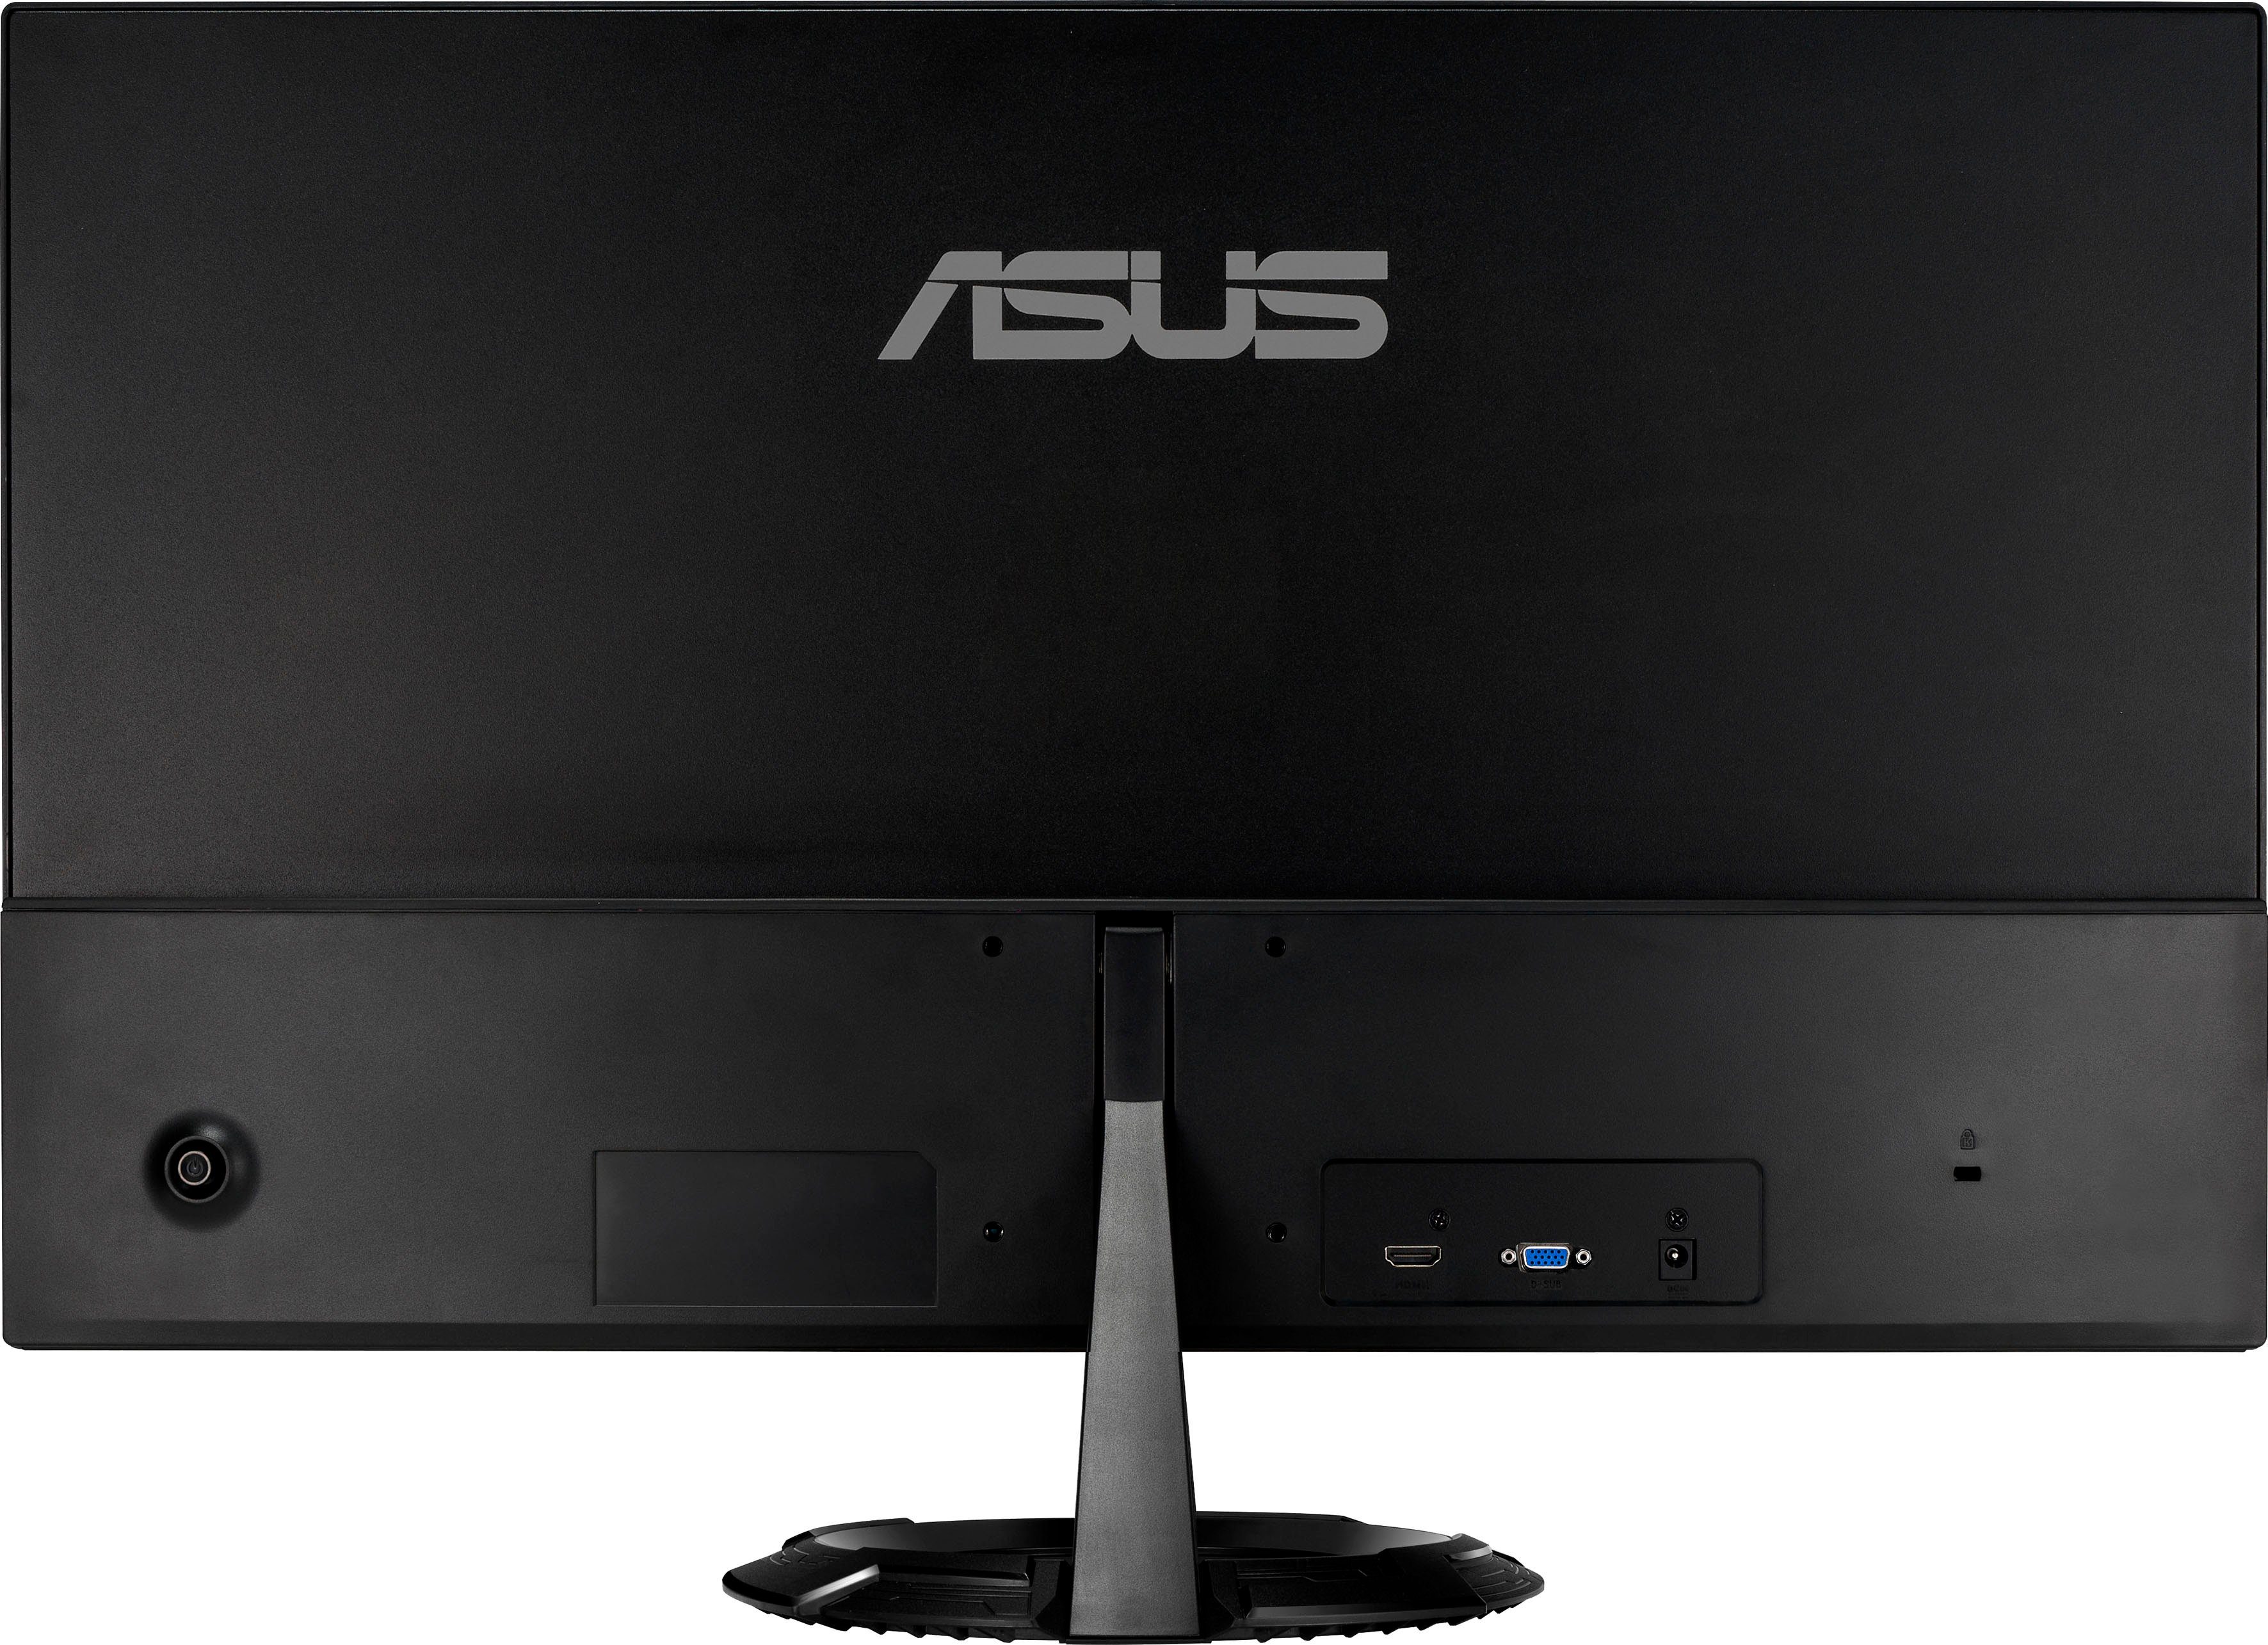 VZ279HEG1R 75 Reaktionszeit, Asus 1080 HD, Full Hz, IPS) (68,6 cm/27 LED-Monitor ms 1 px, 1920 x ",